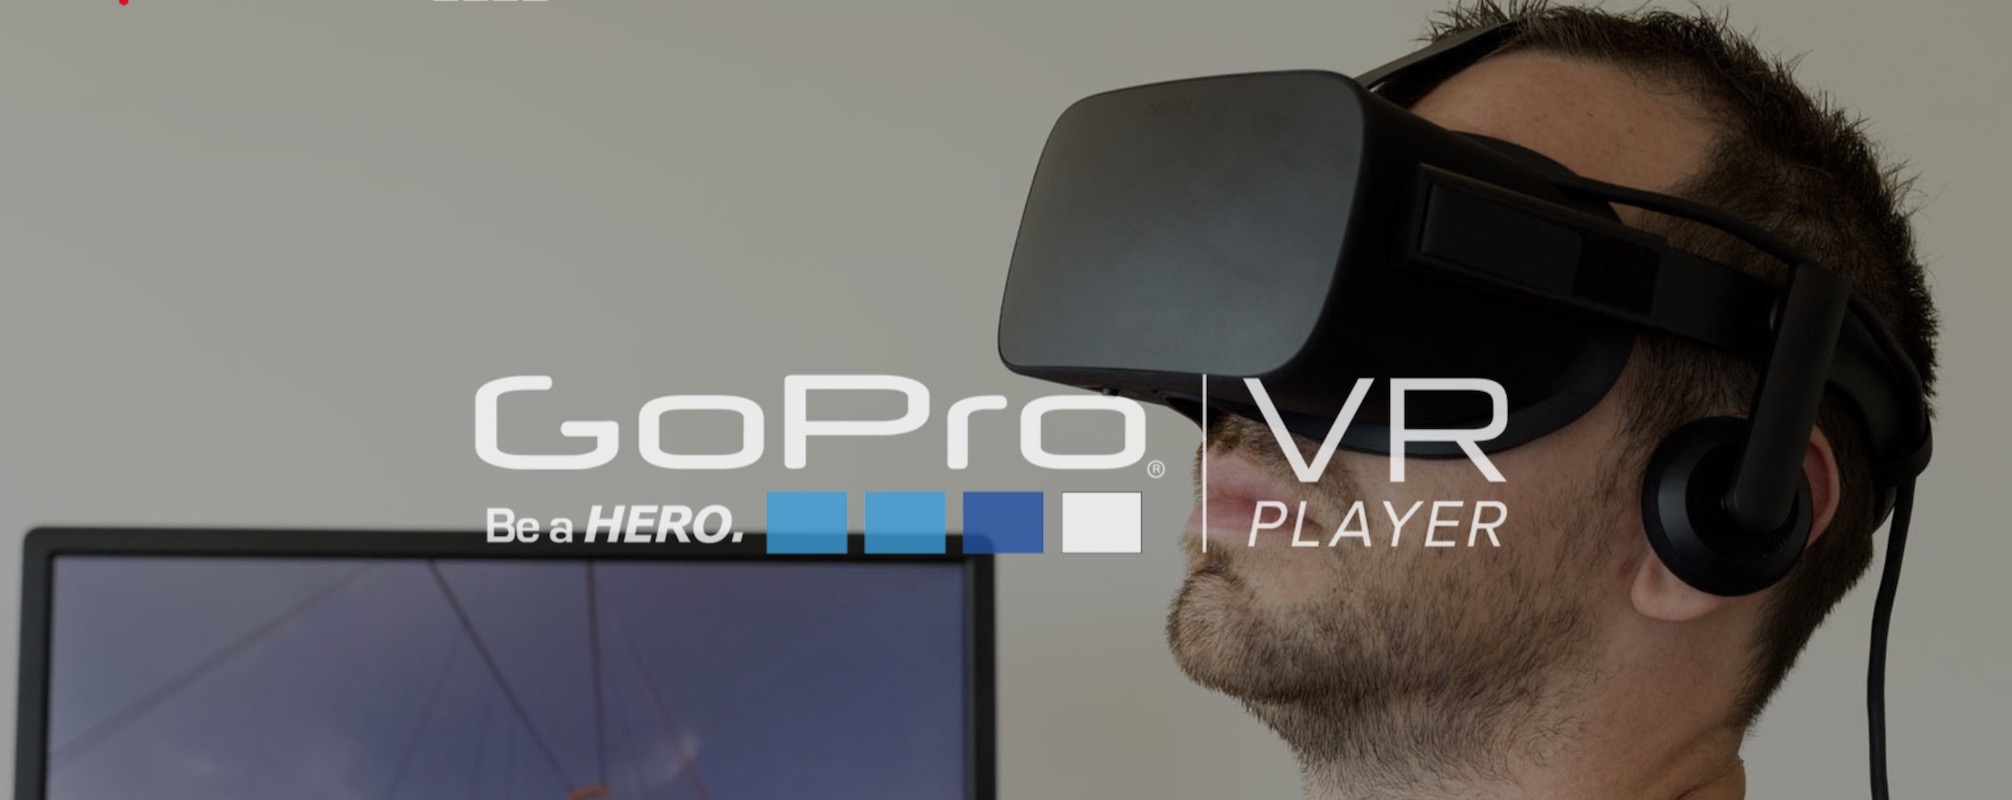 gopro vr player backend